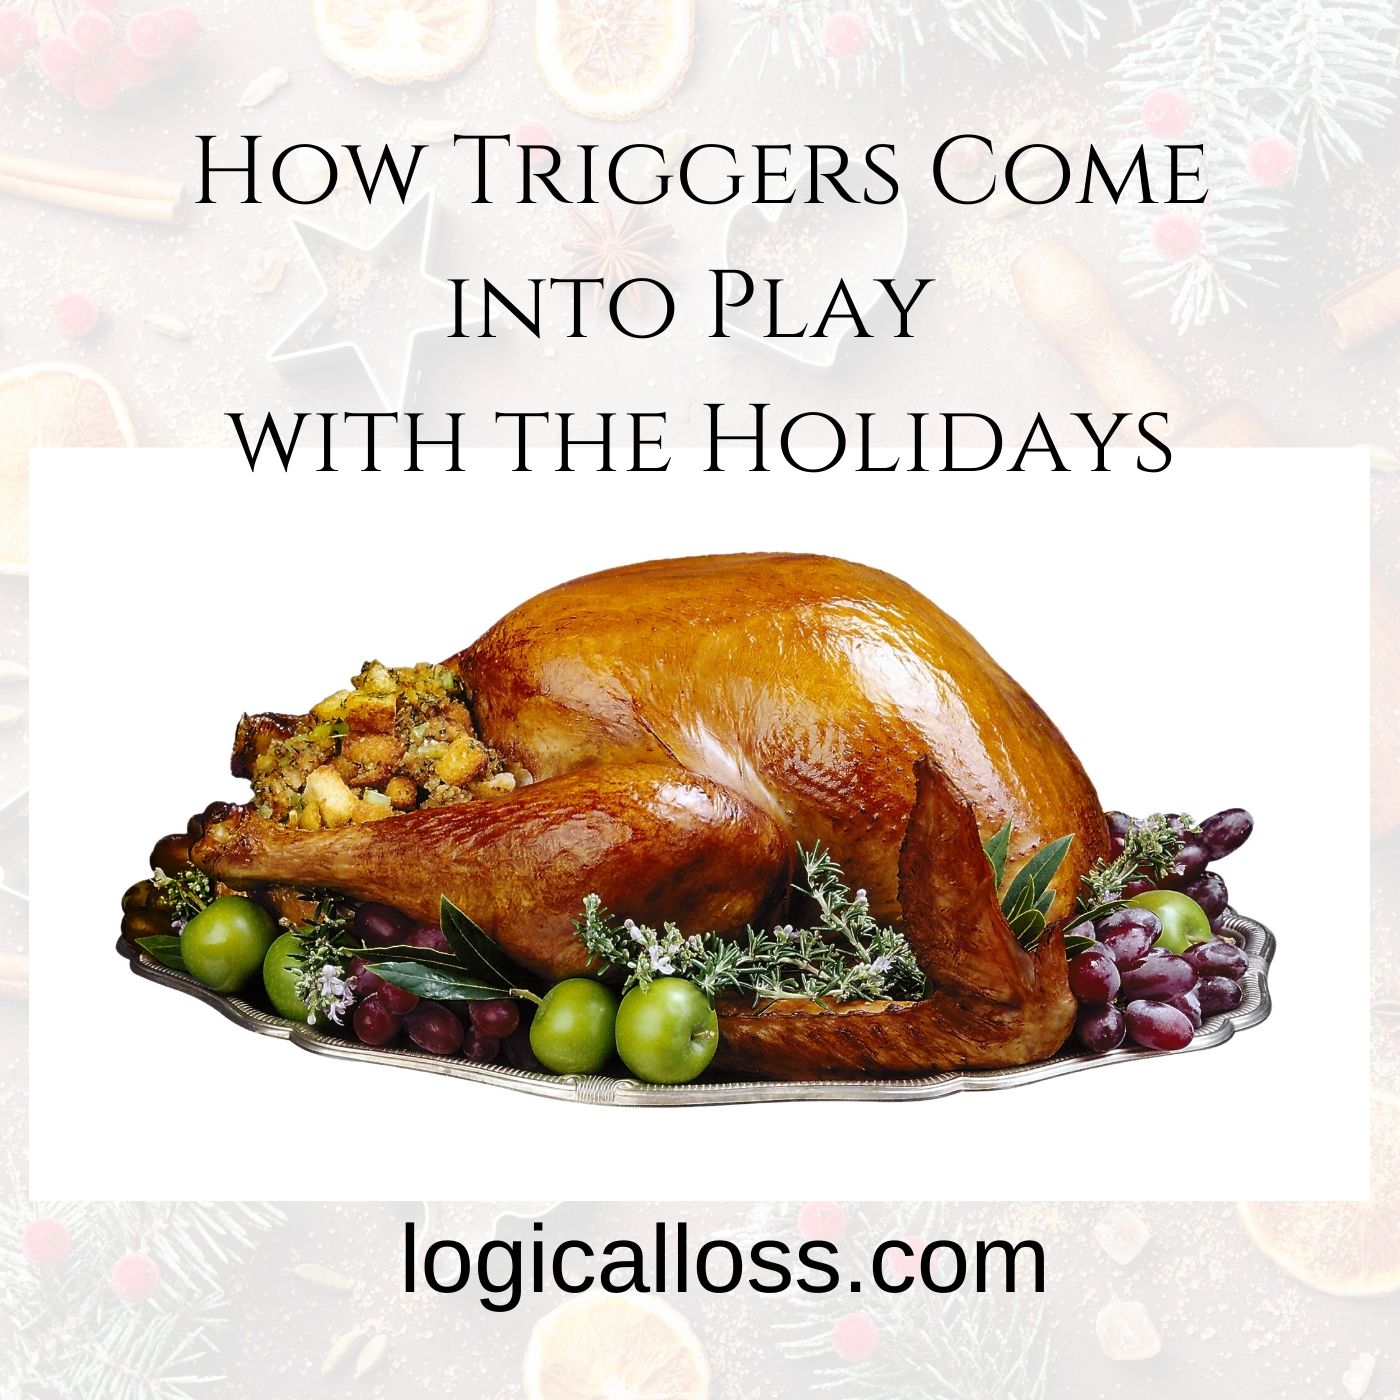 How Triggers Come into Play with the Holidays